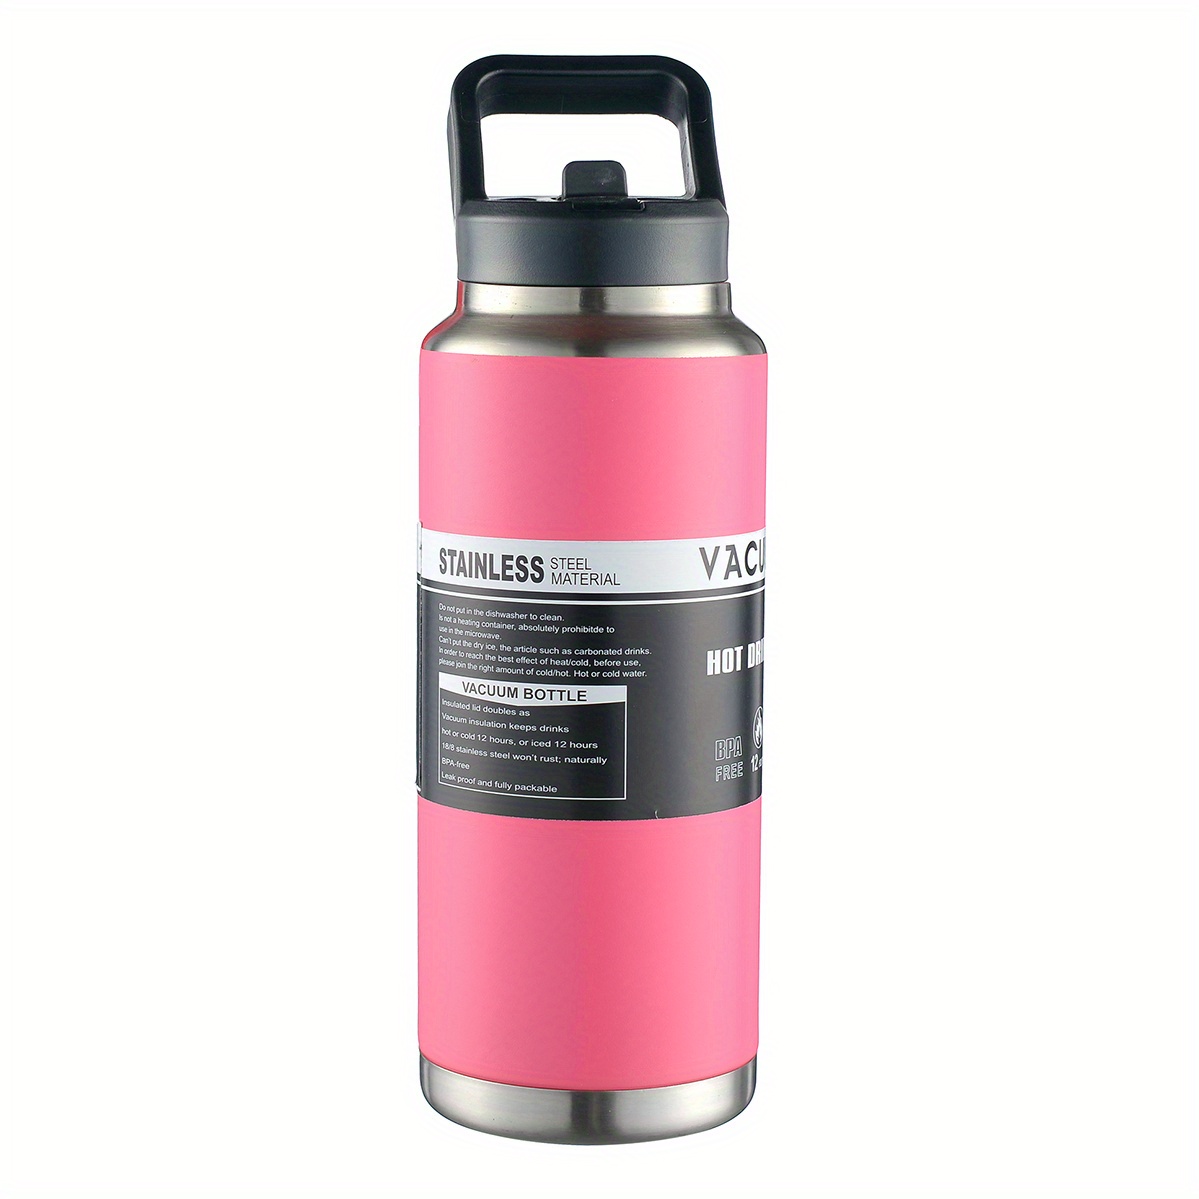 YETI Rambler 26 oz Bottle, Vacuum Insulated, Stainless Steel with Chug Cap,  Ice Pink